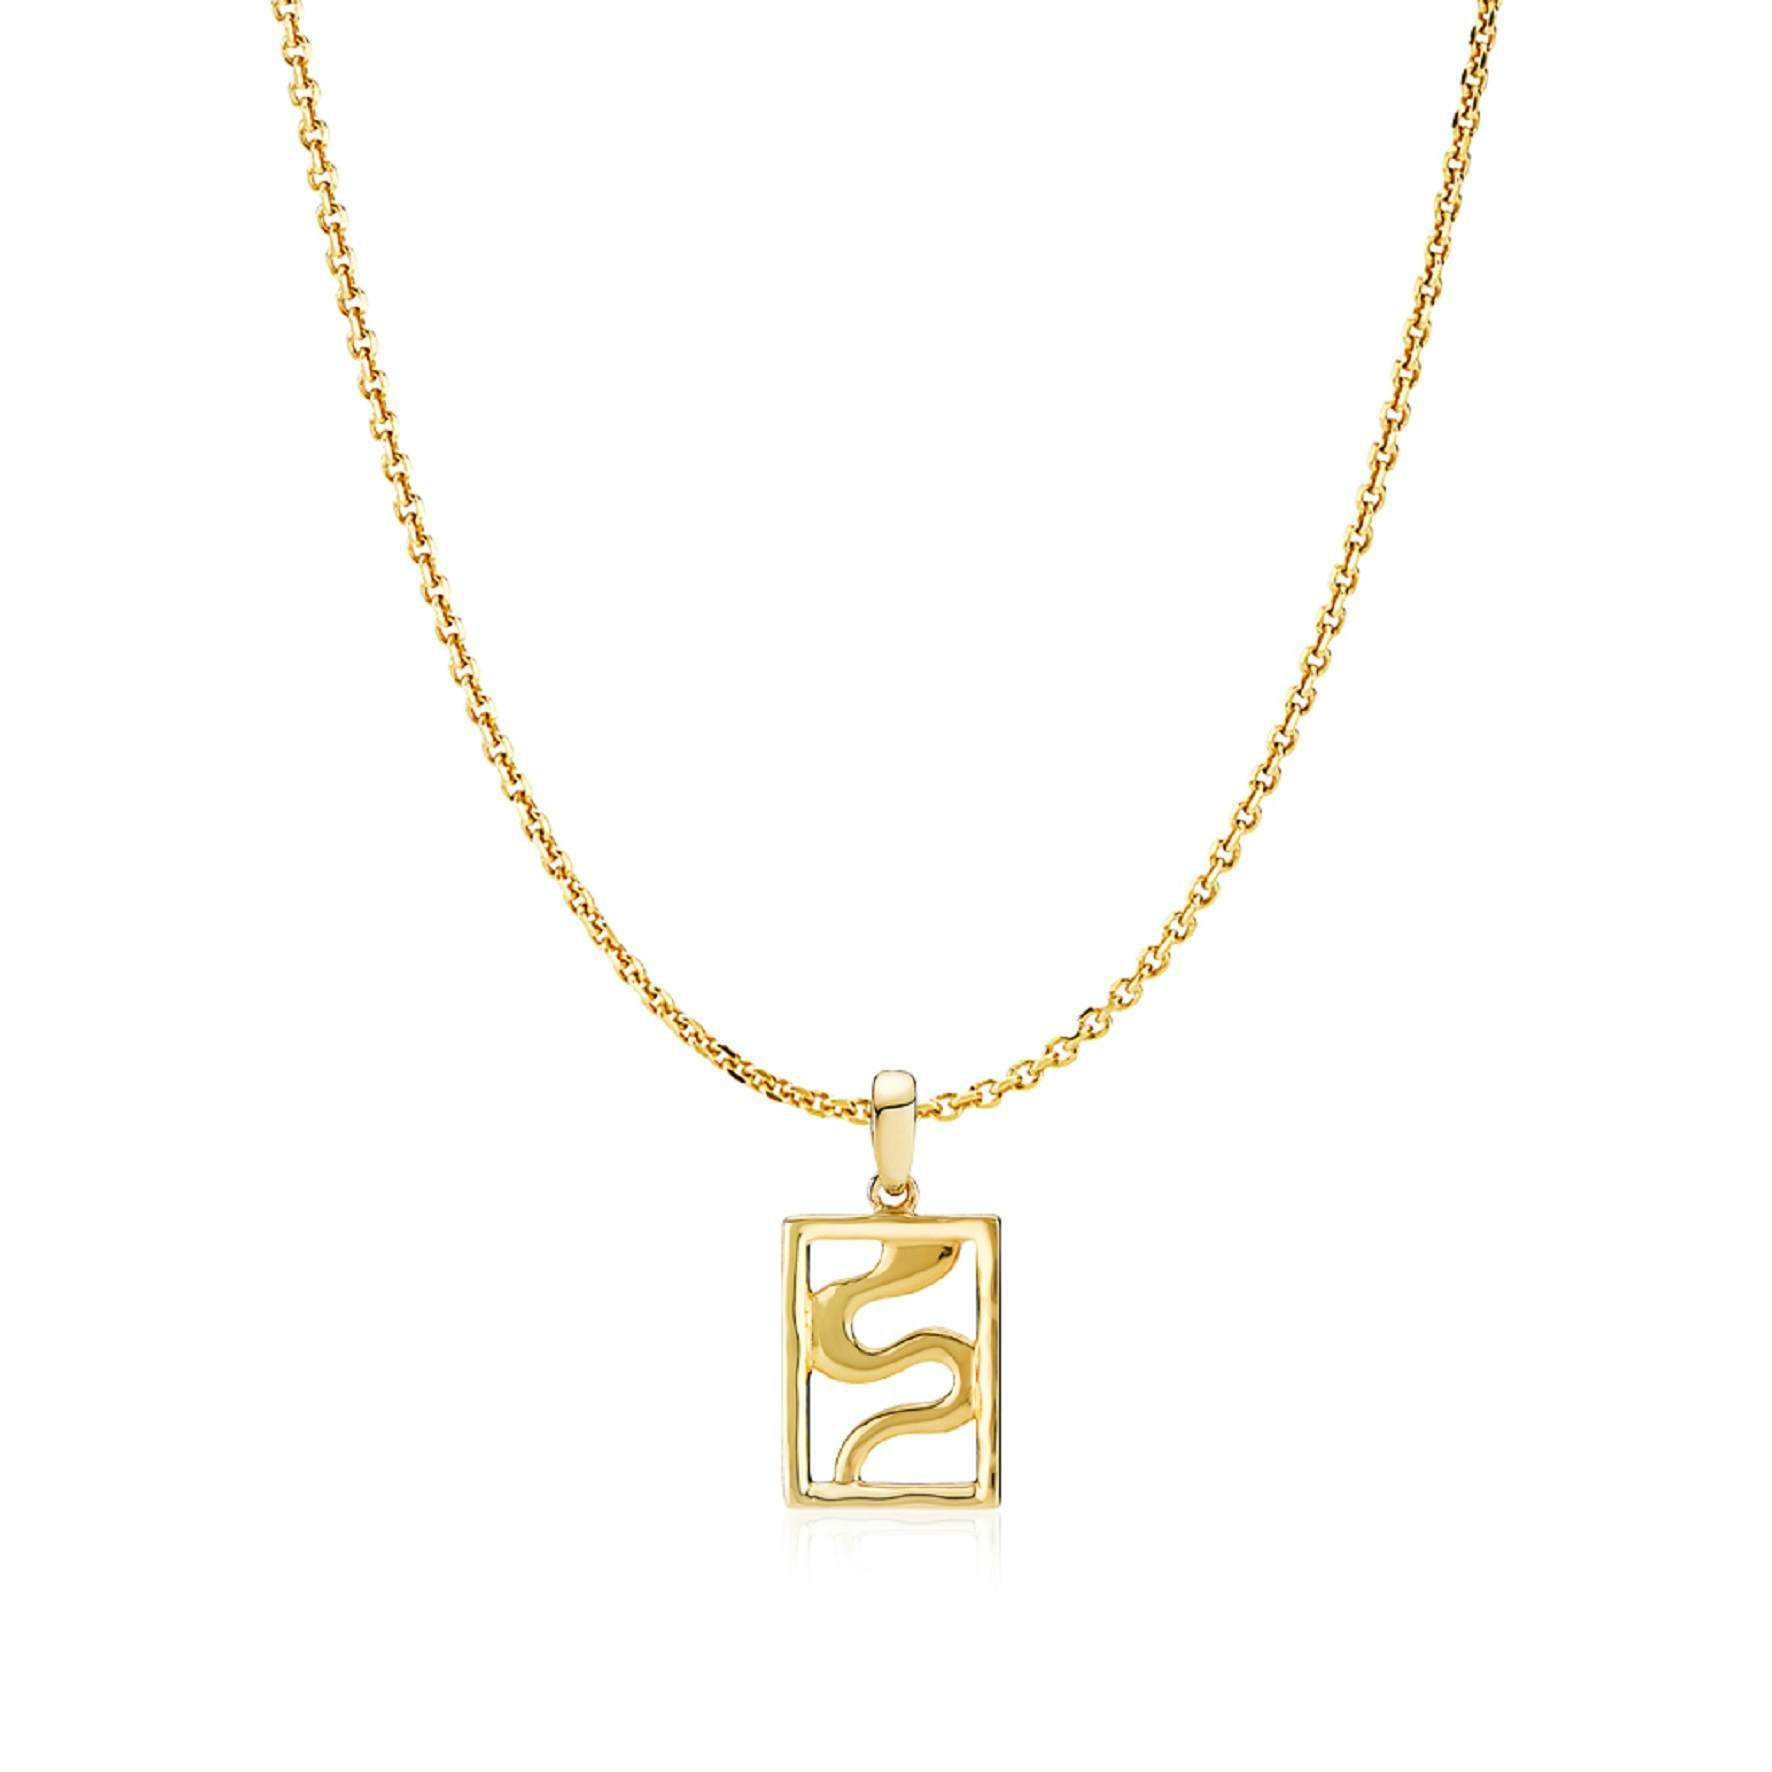 Kathrine Fisker by Sistie Necklace from Sistie in Goldplated-Silver Sterling 925